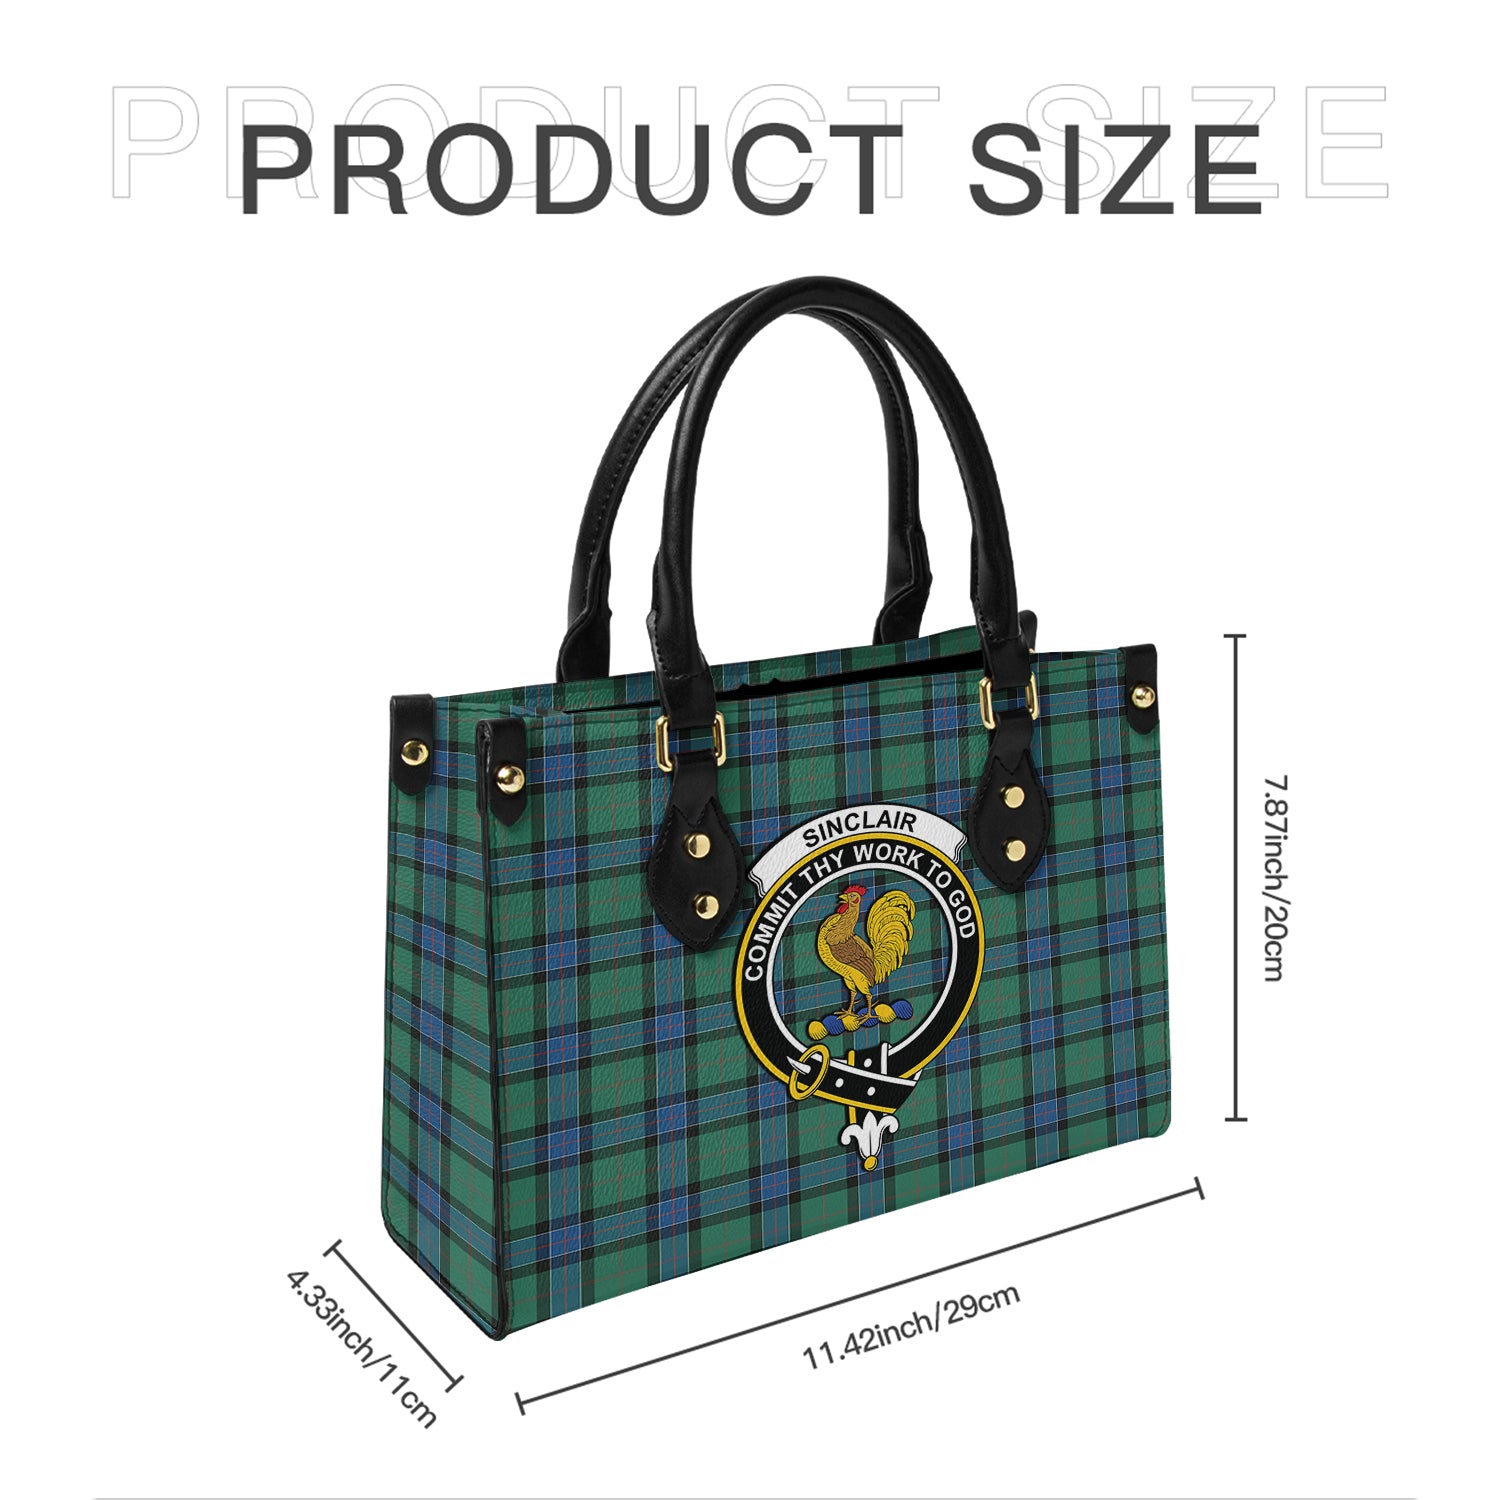 sinclair-hunting-ancient-tartan-leather-bag-with-family-crest